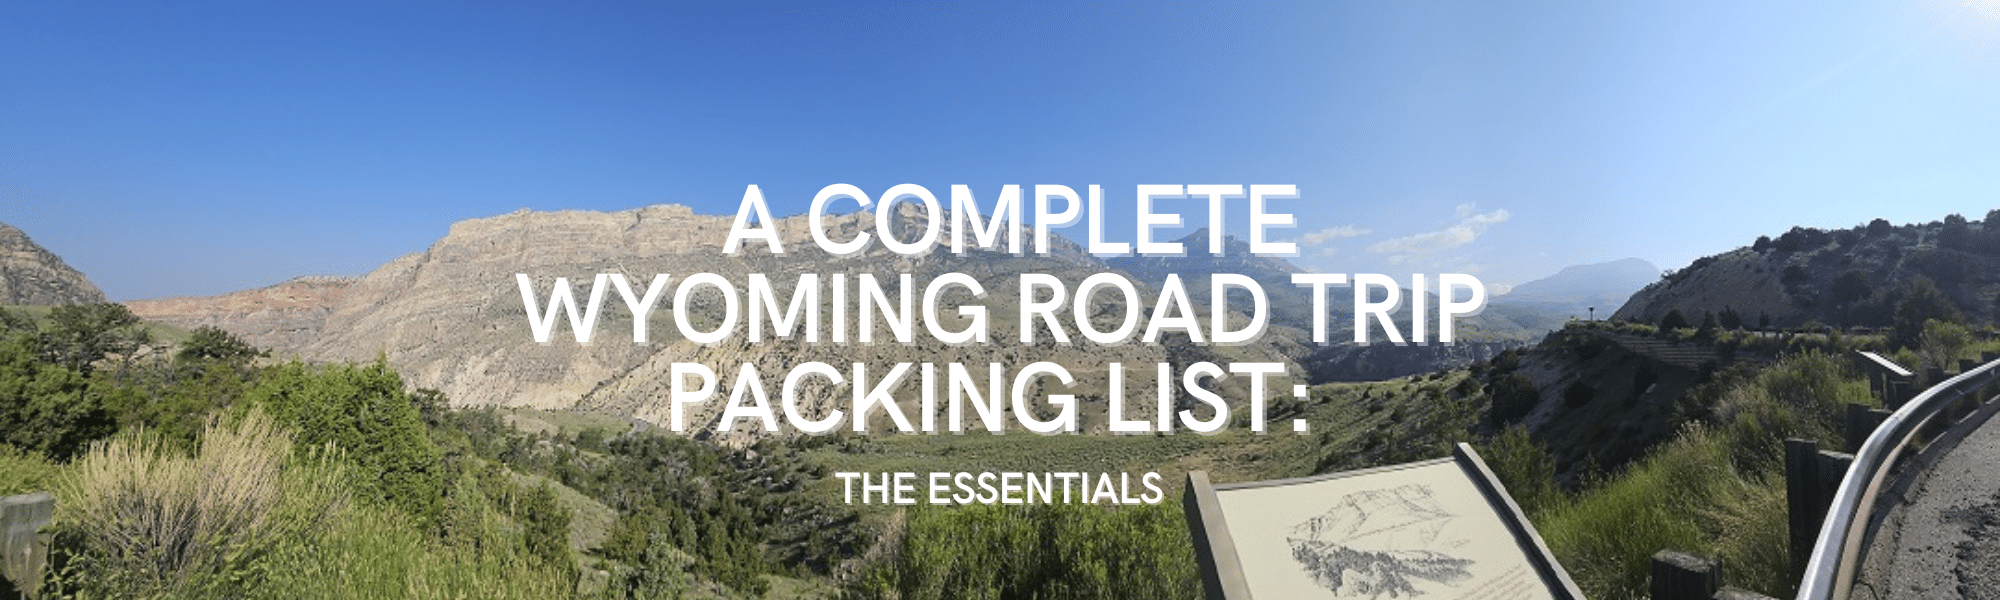 A Complete Wyoming Road Trip Packing List: The Essentials